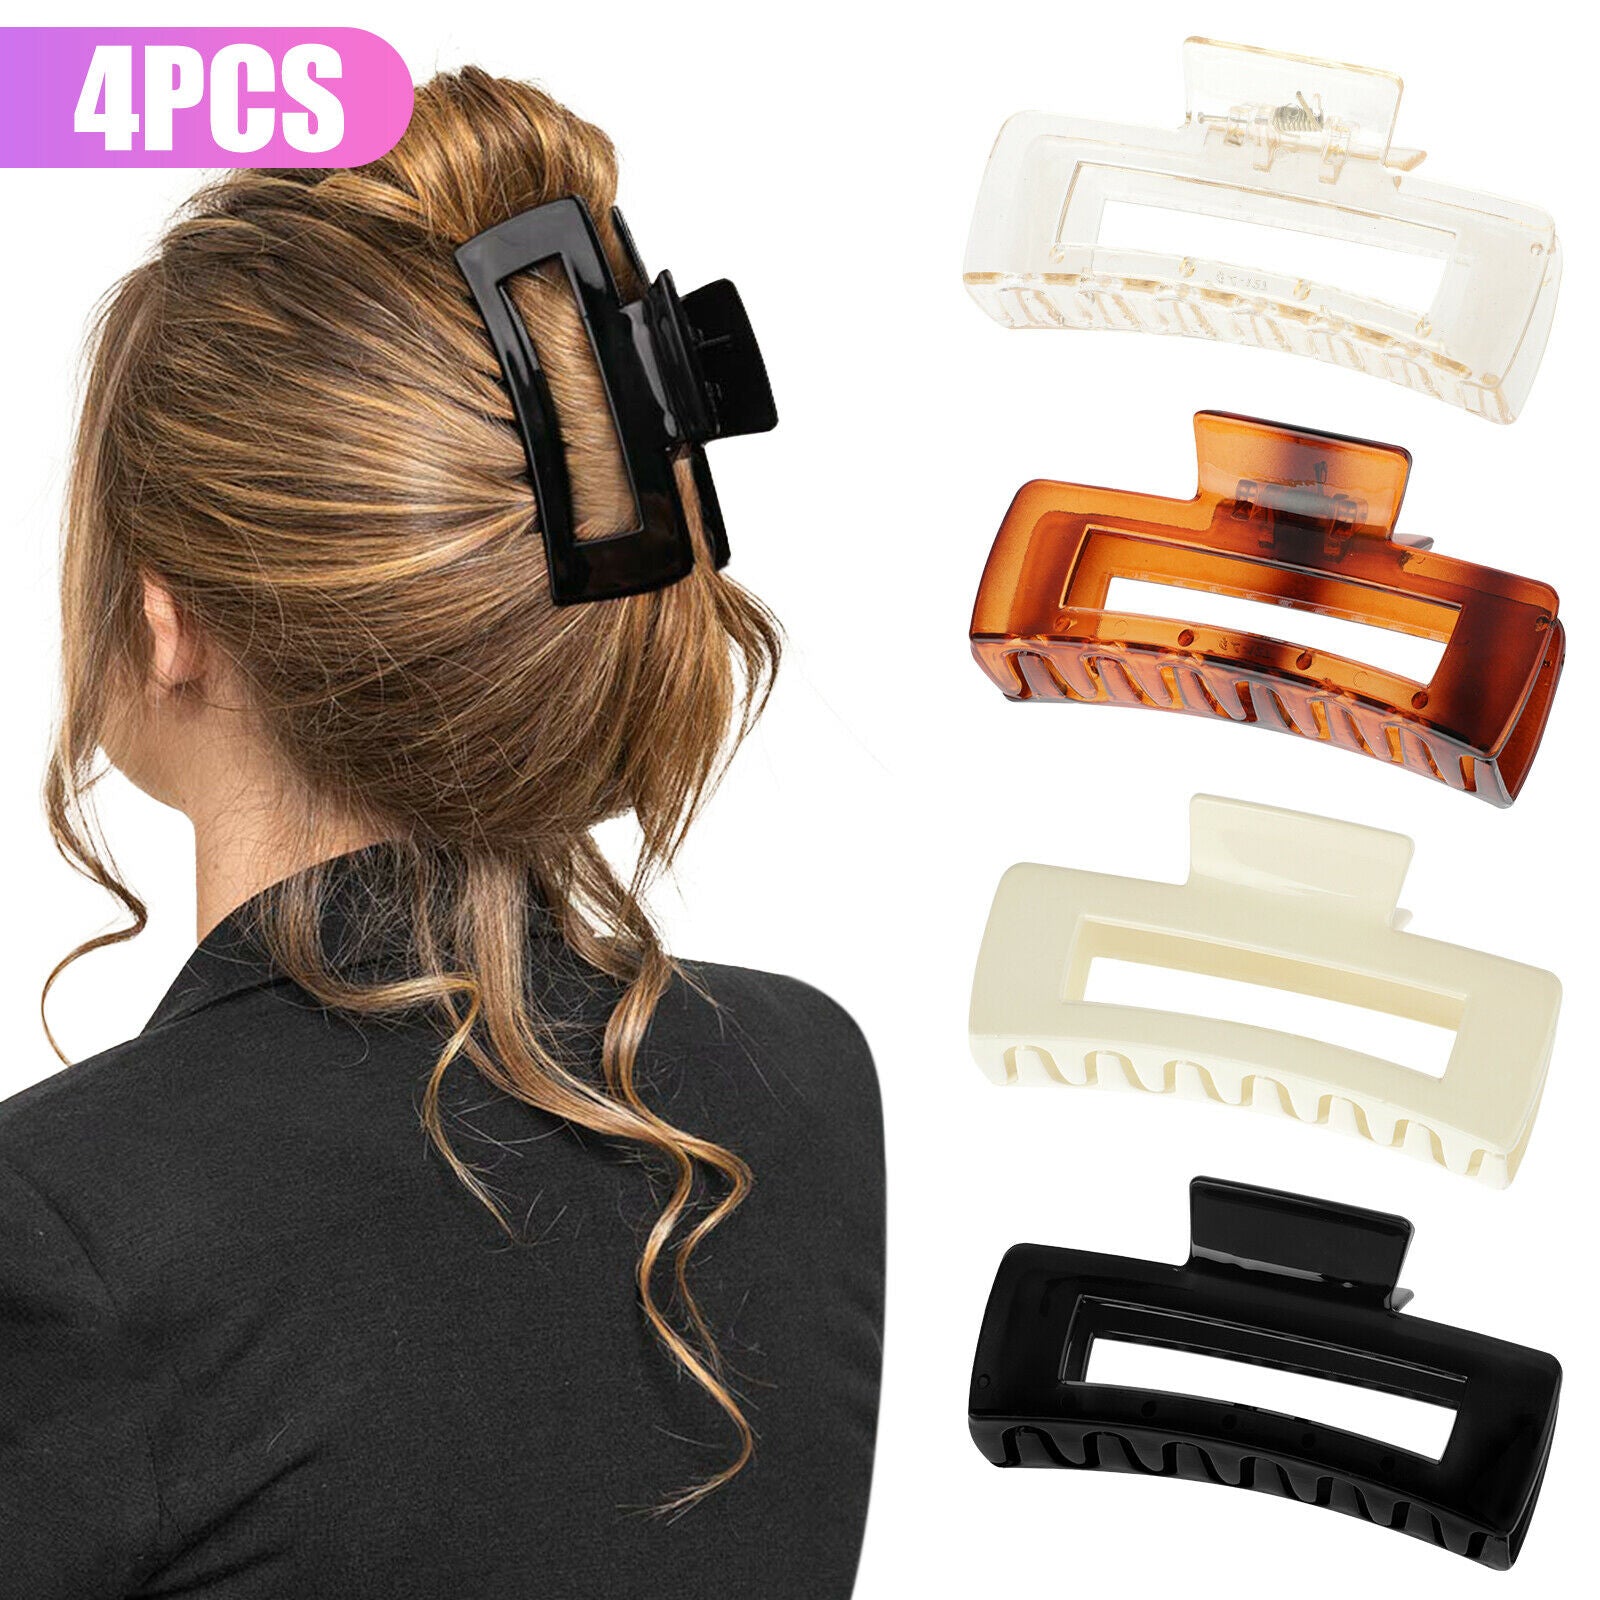 Pack of 4 large hair clips